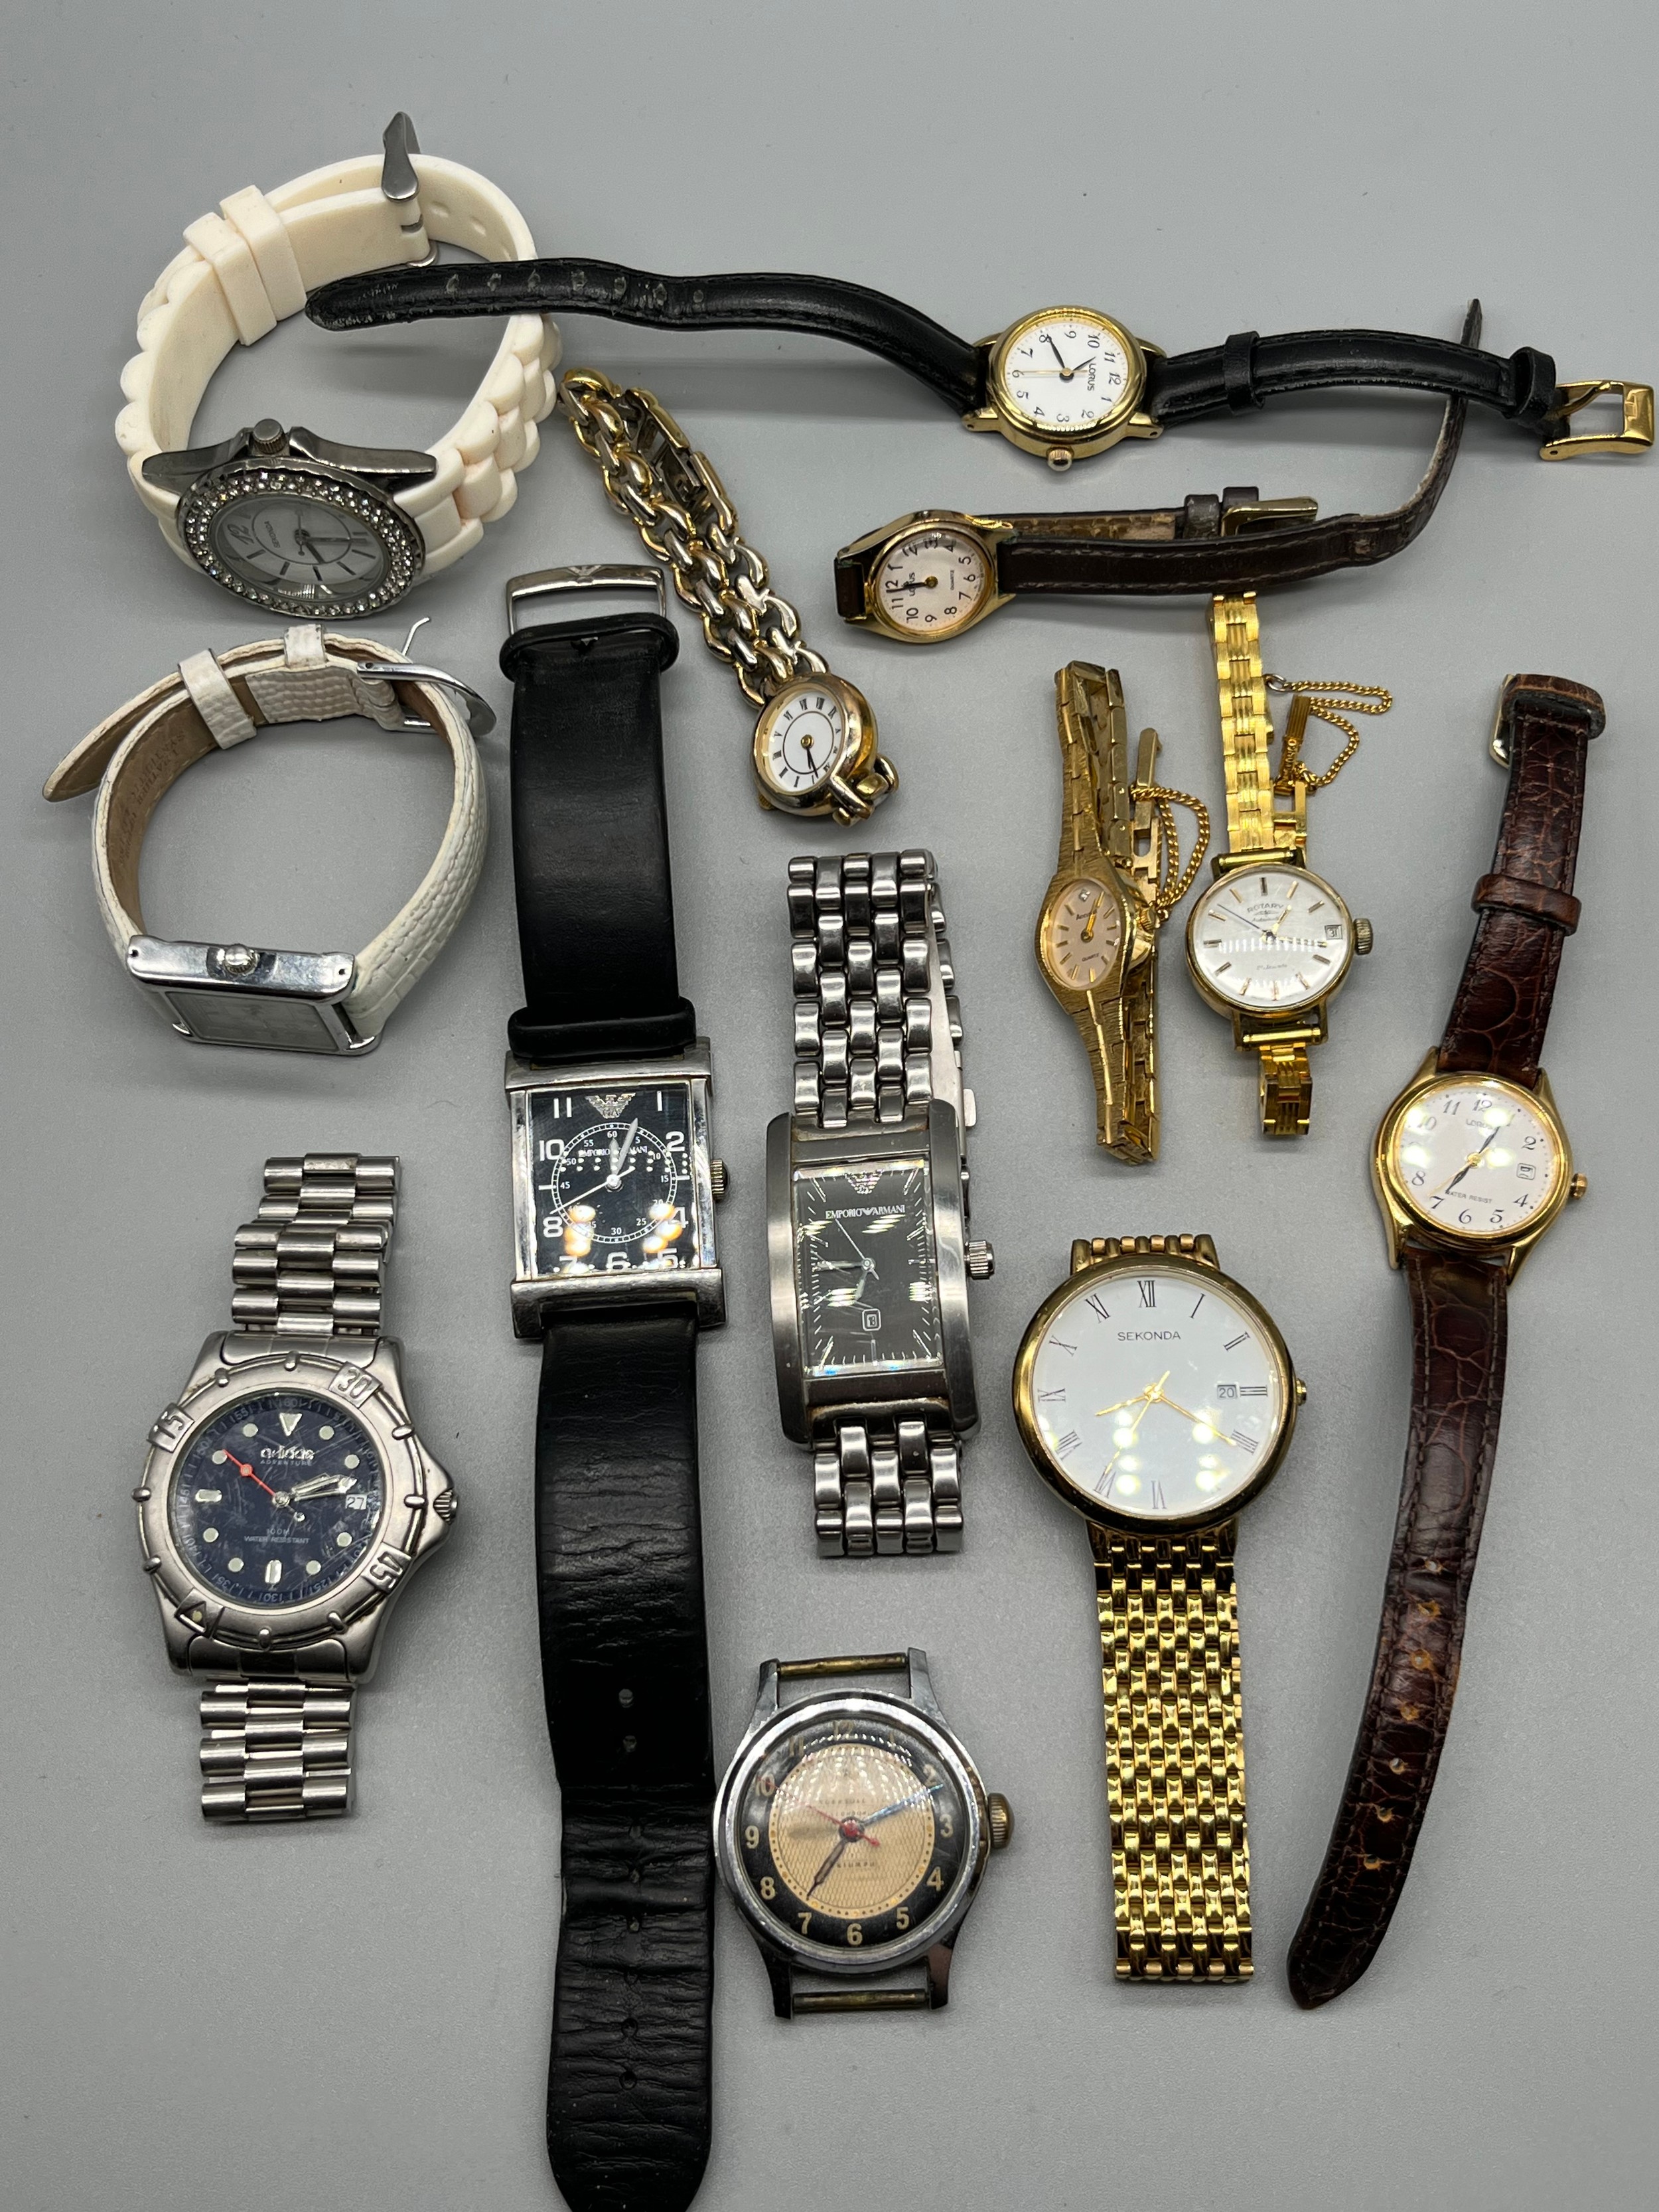 A Collection of various watches; Vintage Ingersoll Triumph watch, Two Emporio Armani watches, Rotary